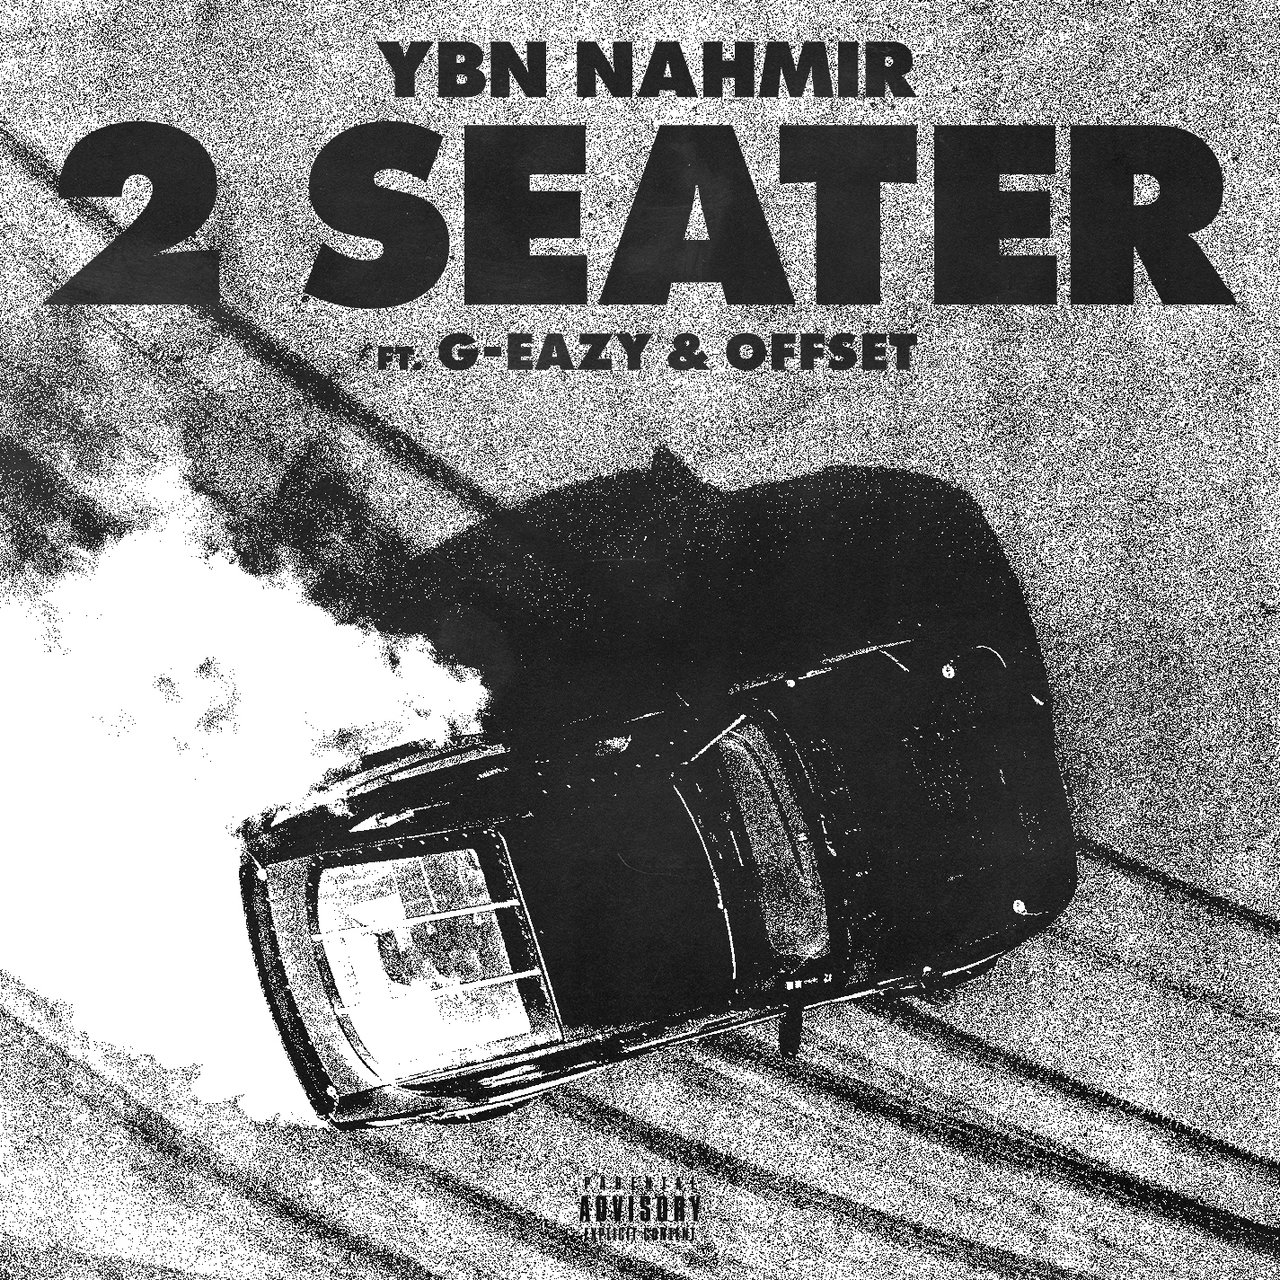 YBN Nahmir - 2 Seater (ft. G-Eazy and Offset) (Cover)